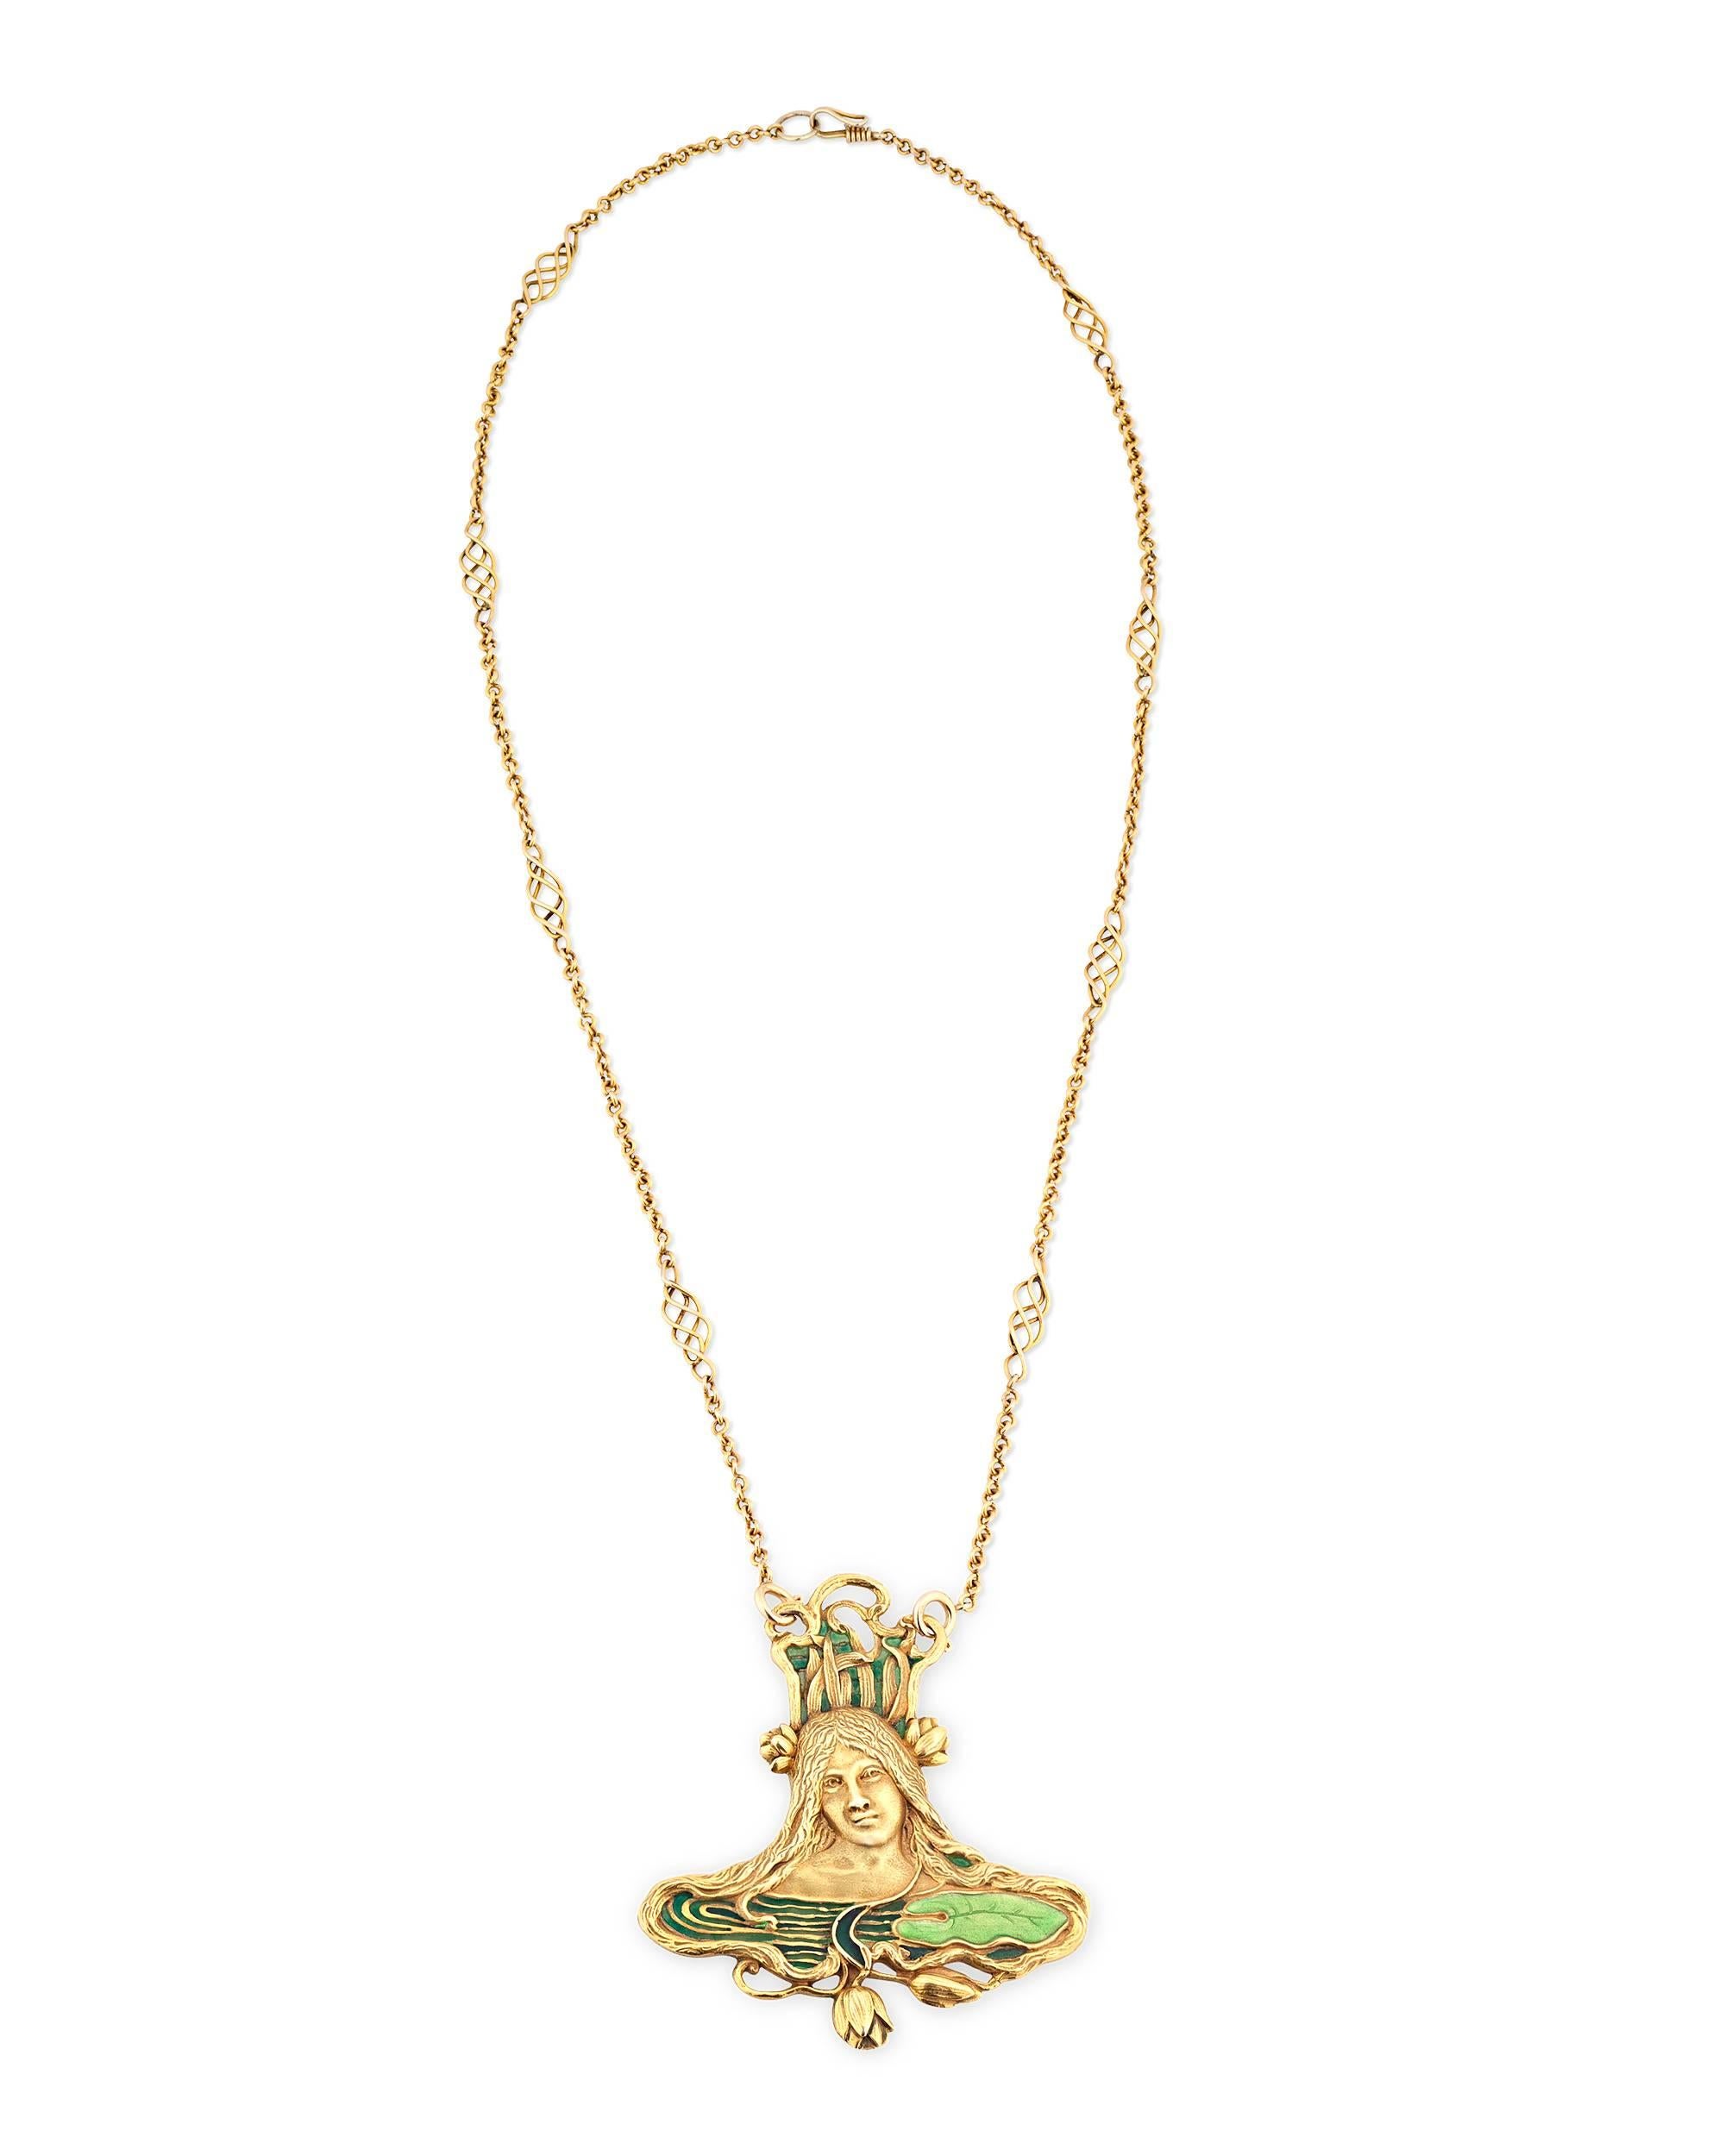 A quintessential piece of Art Nouveau design, this pendant, and a matching chain is the work of Art Nouveau designer Louis Zarra. Sculpted from 18k yellow gold, the pendant takes the form of a beautiful woman with flowing tresses surrounded by